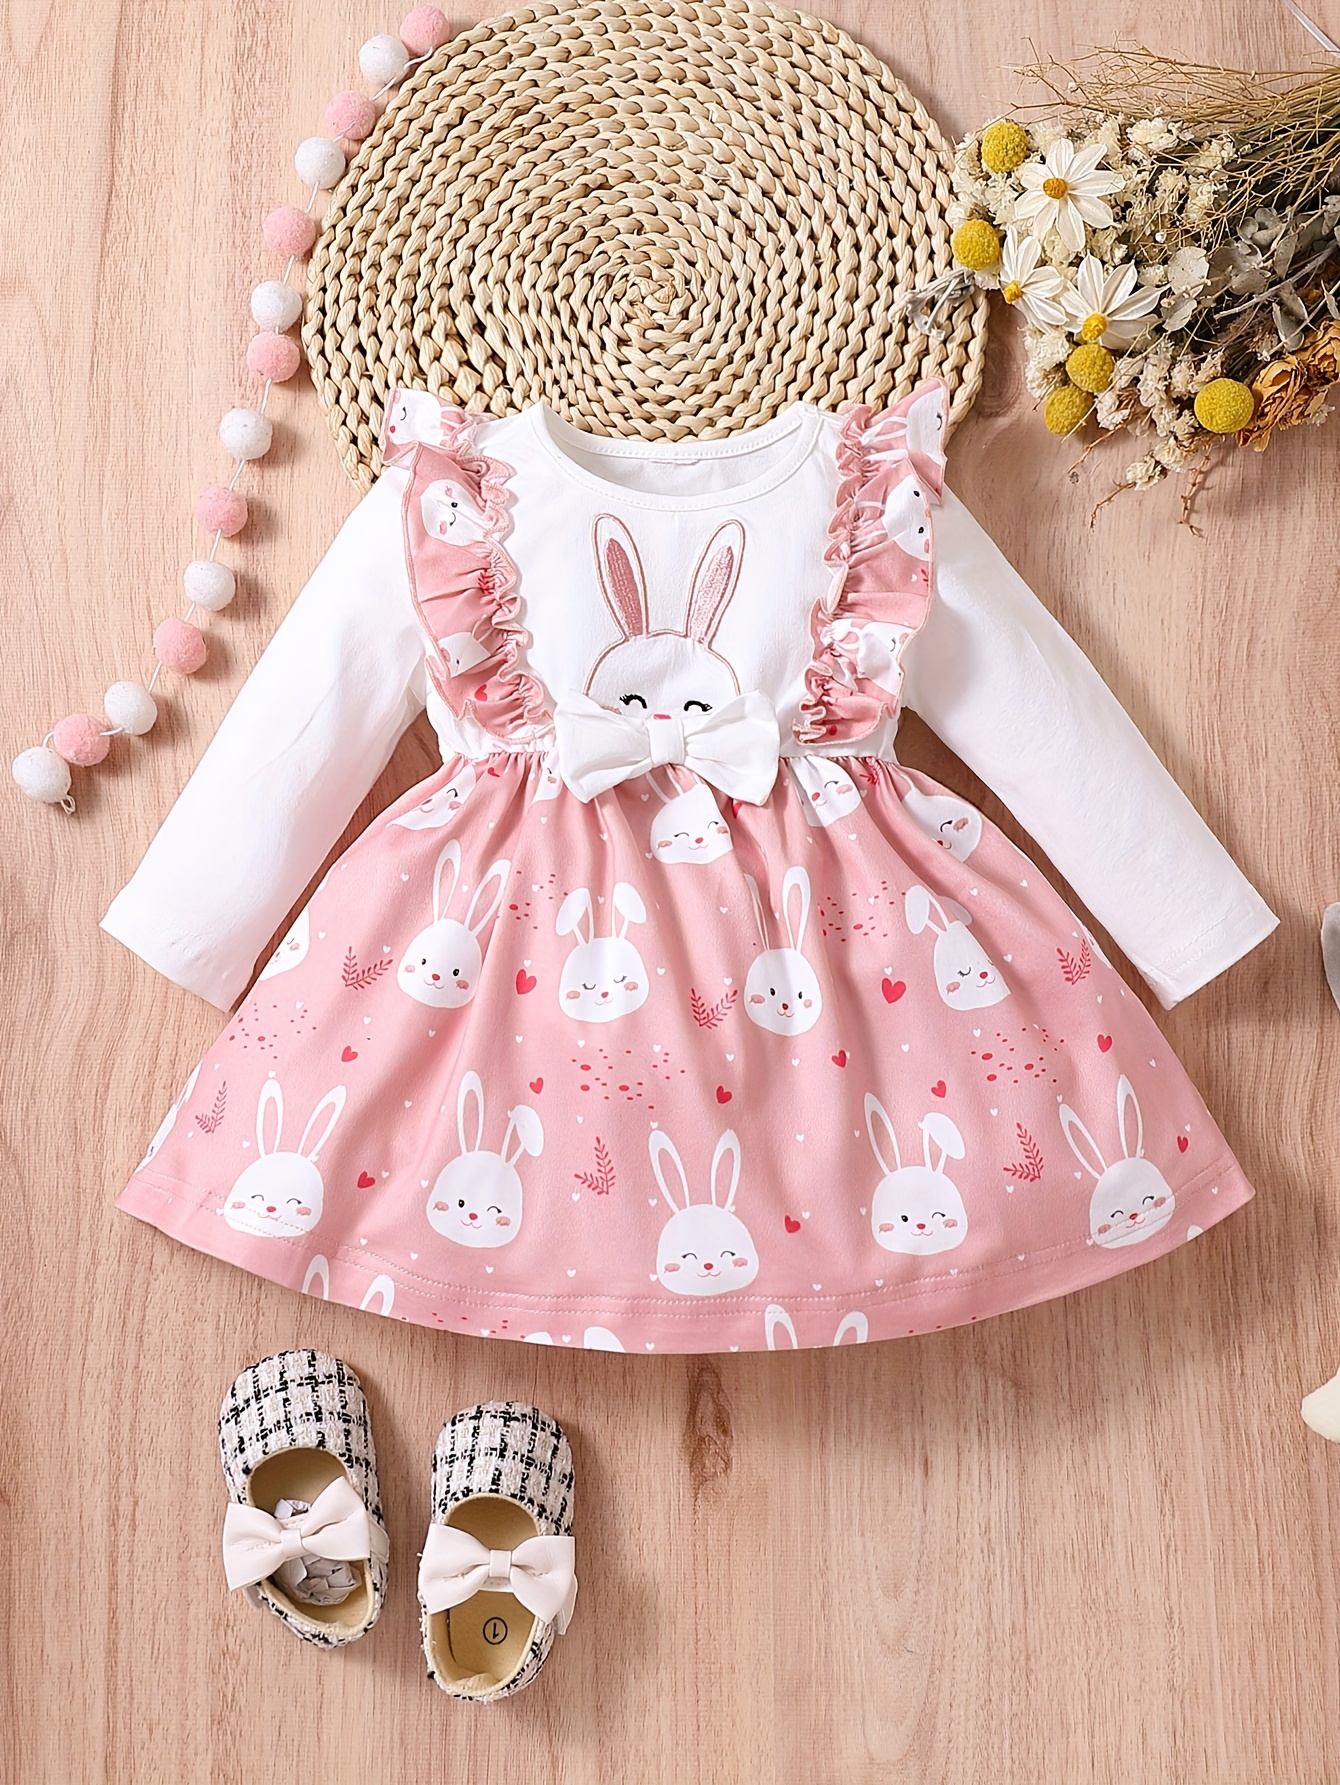 Toddler Kid Baby Girls Easter Dress Short Sleeve Easter Bunny Print Pink Dresses  Clothes 